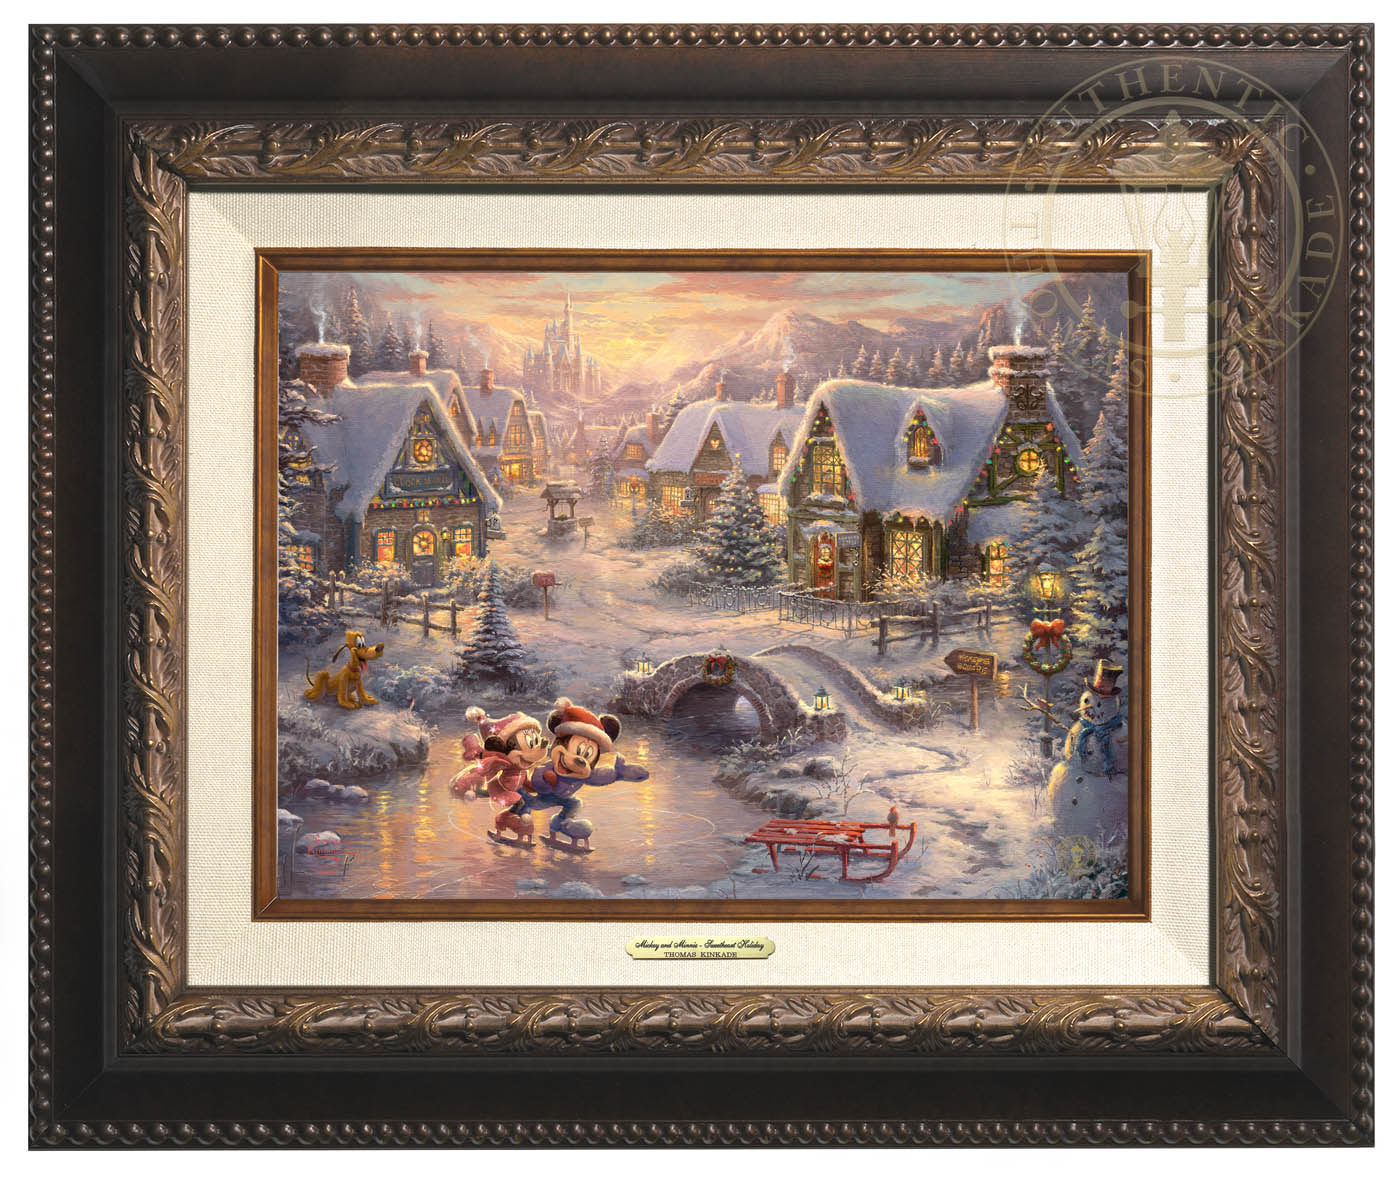 Mickey Mouse and Minnie Mouse joyfully skate across a frozen pond, celebrating the magic of the Holidays together.  Aged Bronze  Frame